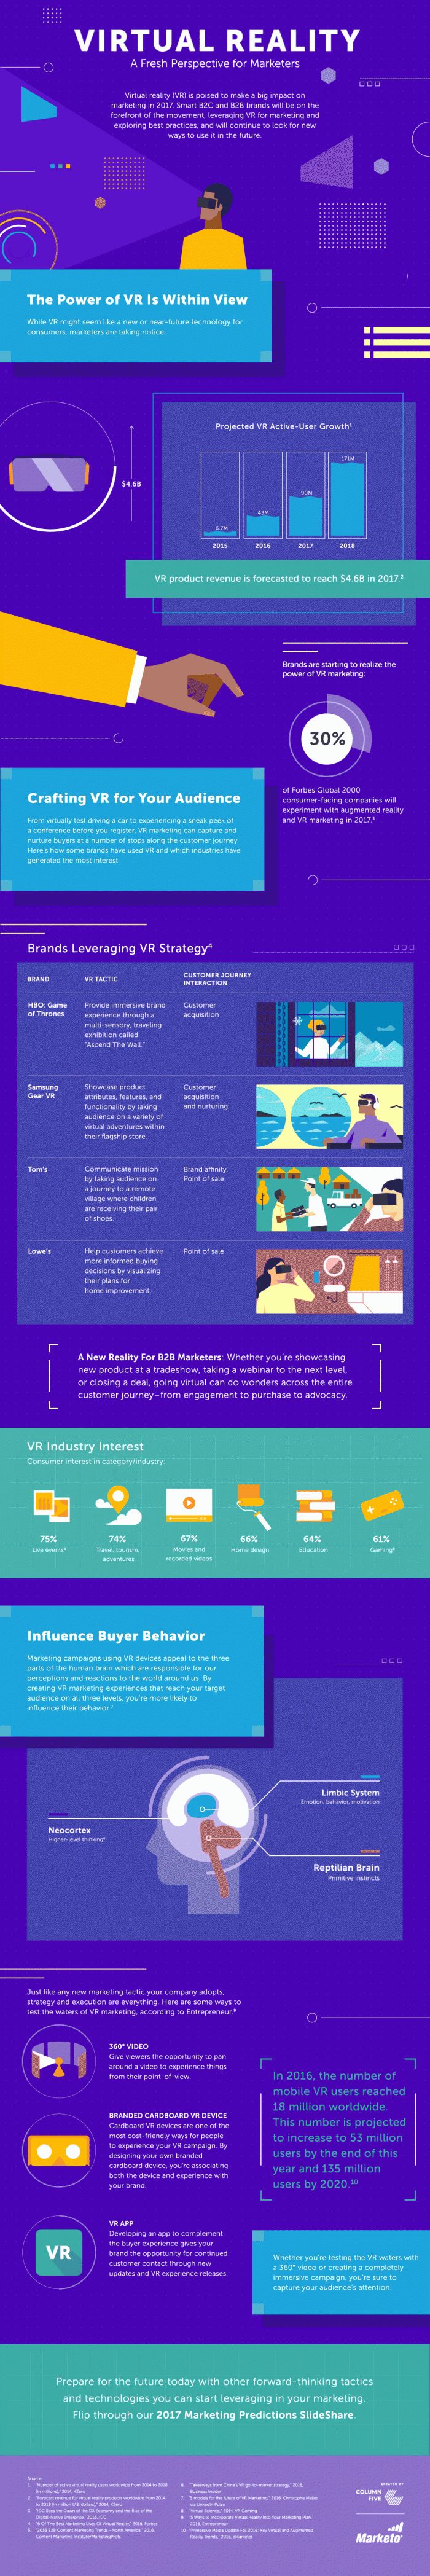 Infographic: Virtual Reality is now a Marketing Reality #Infographics